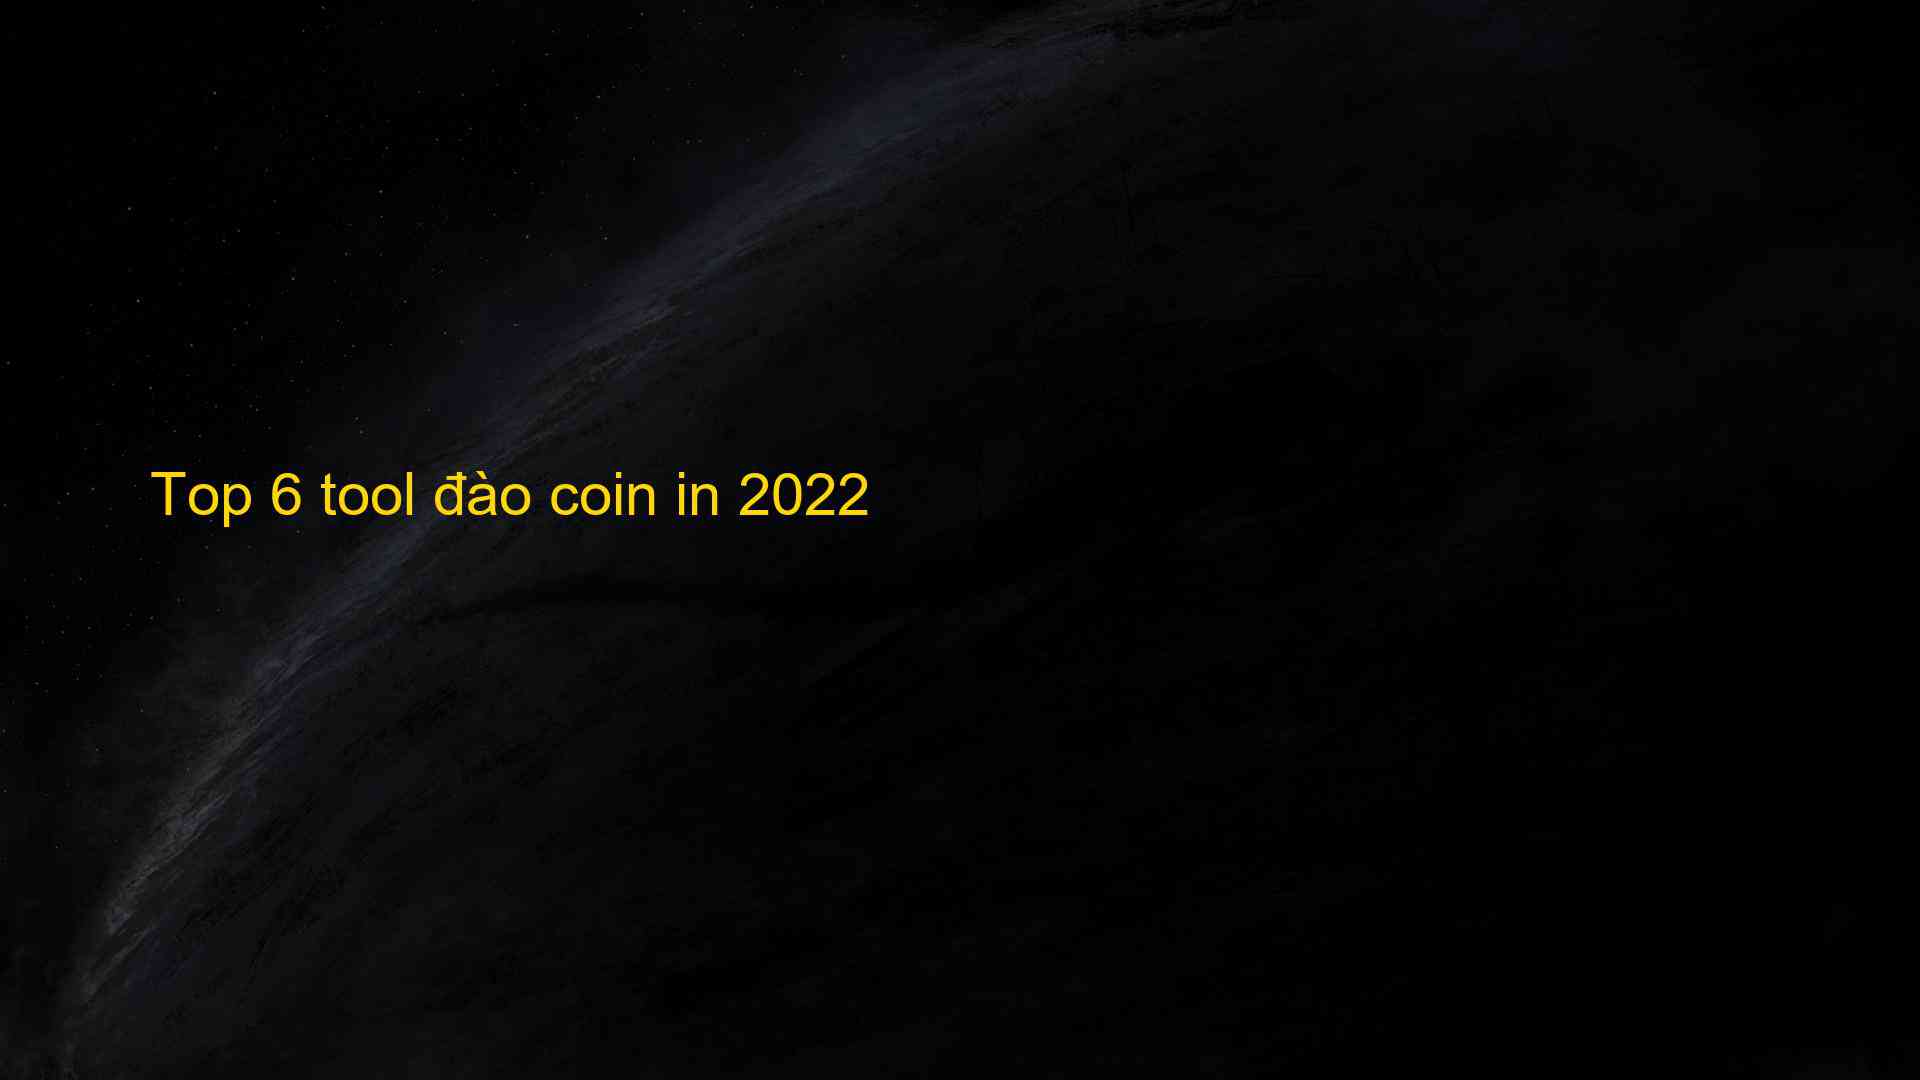 Top 6 tool dao coin in 2022 1659965656